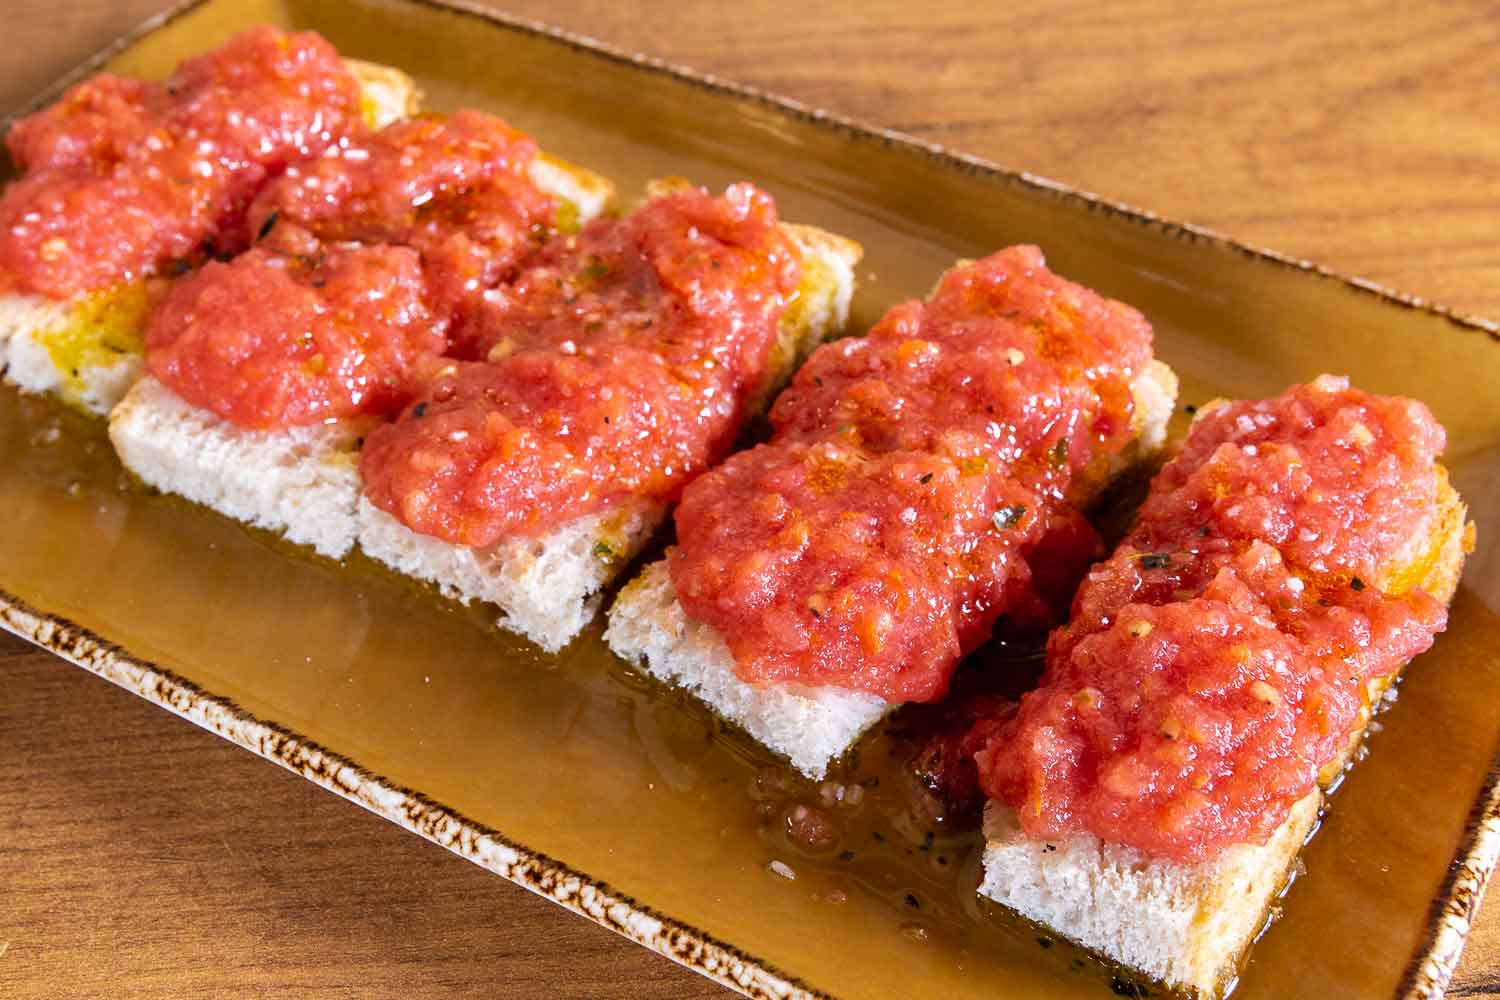 Bread with tomato and virgin olive oil